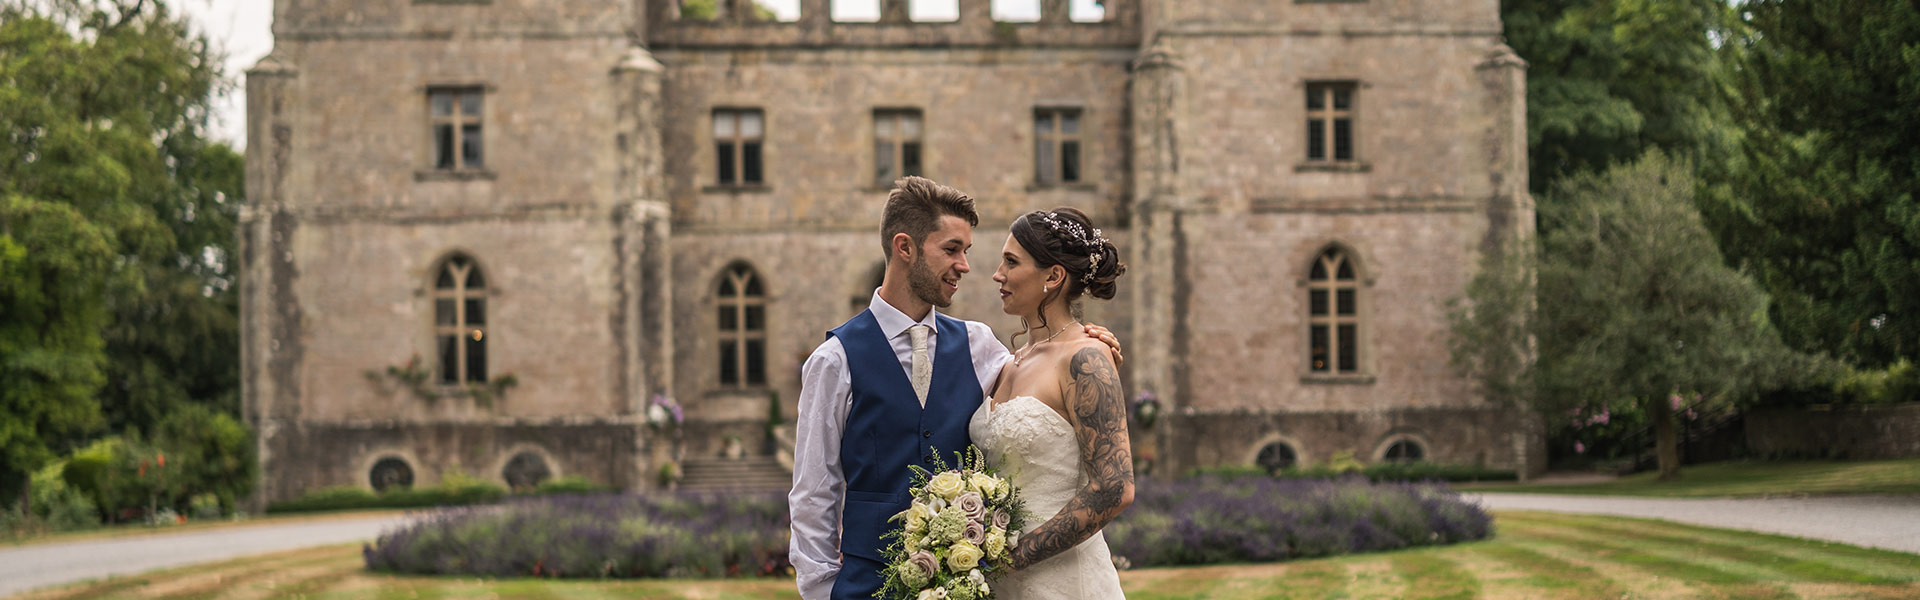 Abi & Derry – Clearwell Castle